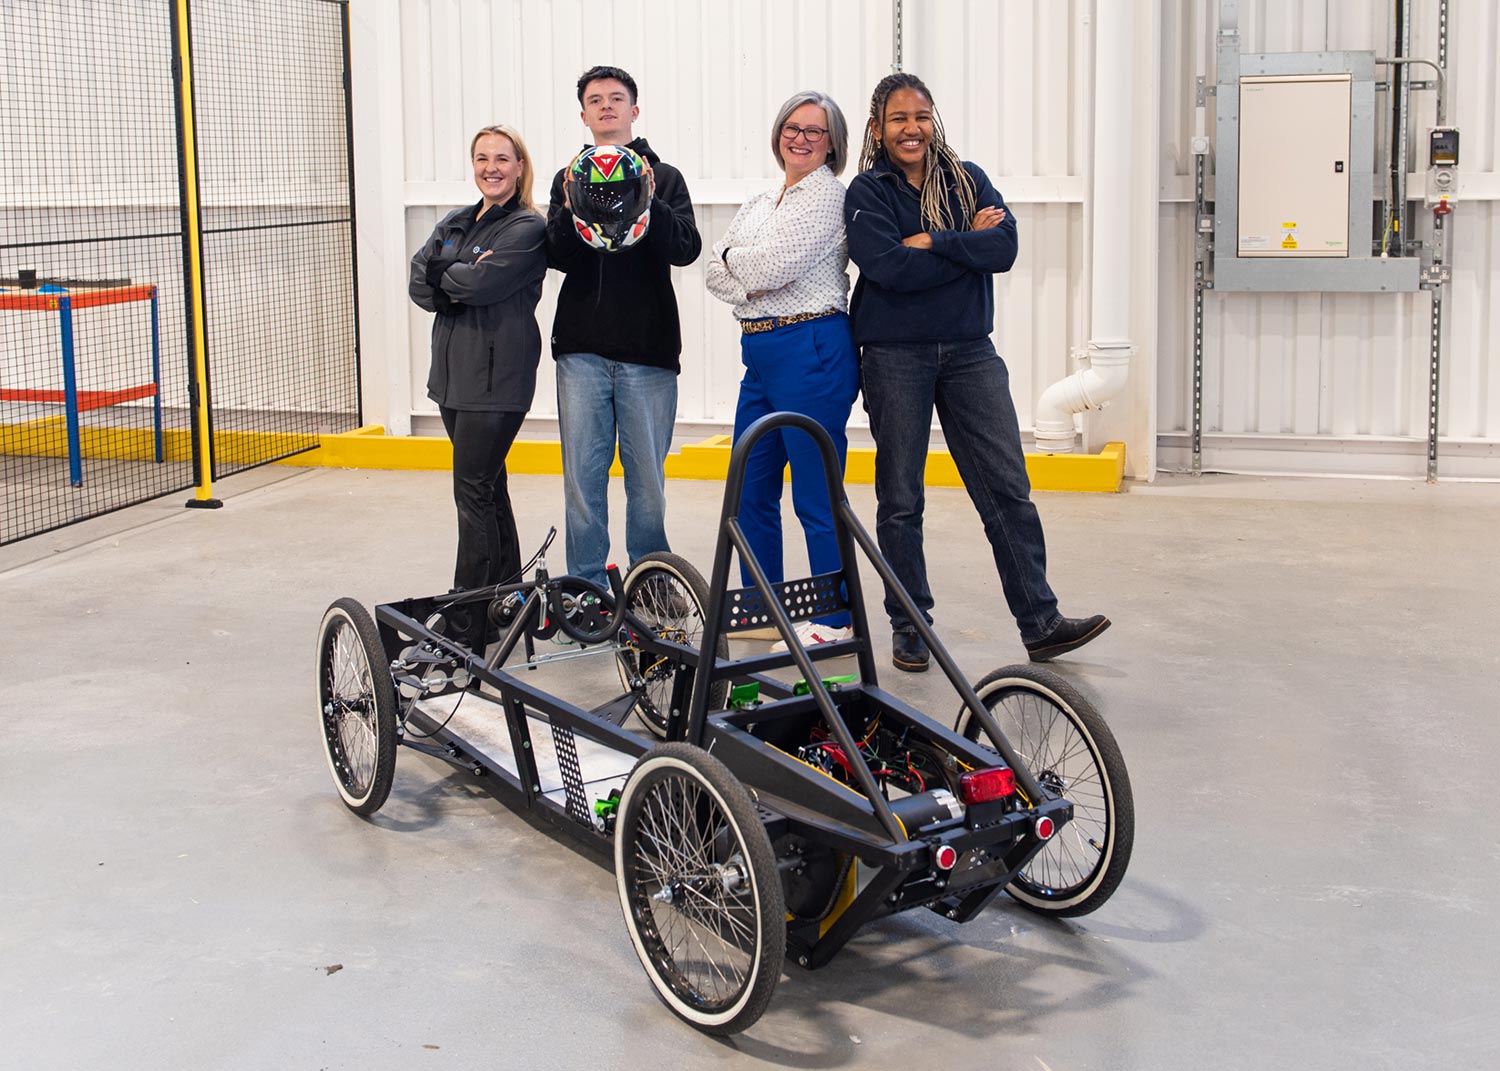 A team of 4 pose behind their electric go-kart.